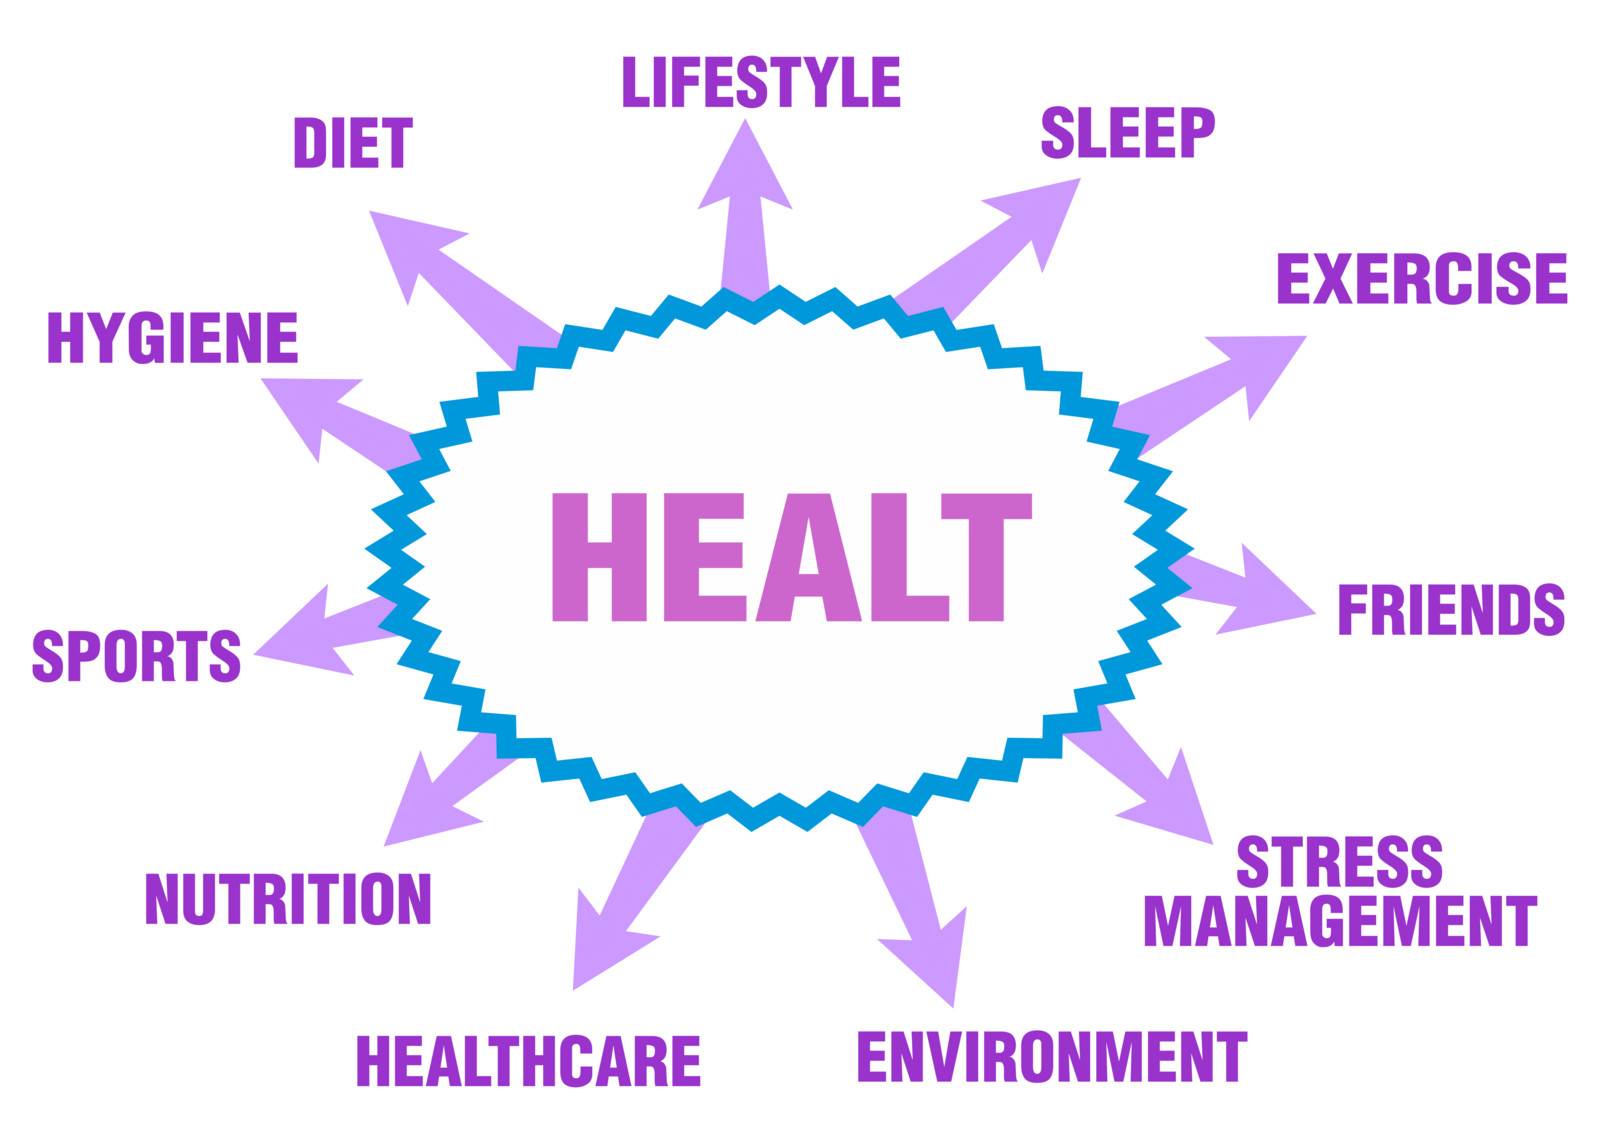 Some possible topics about health